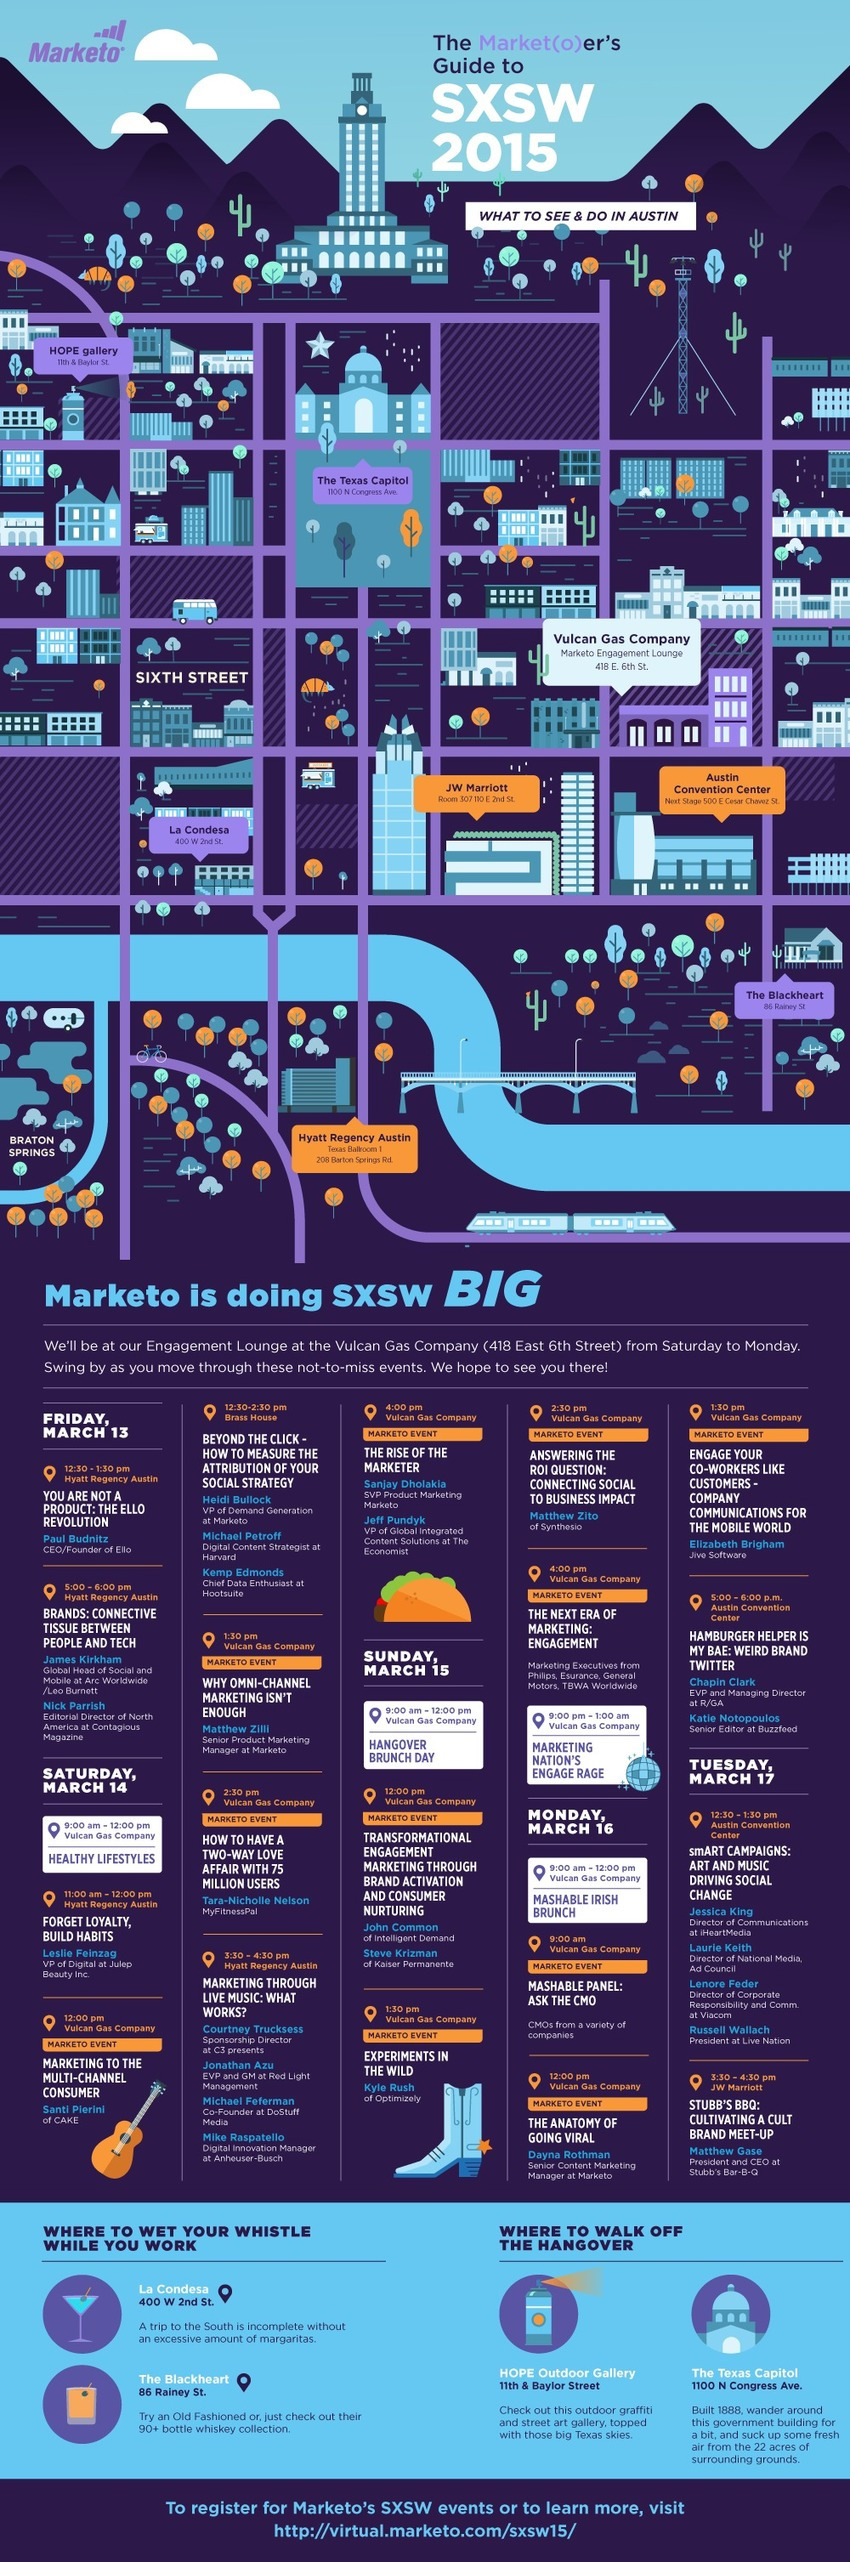 [Infographic] The Marketo(ers) Guide to SXSW - Marketo | The MarTech Digest | Scoop.it